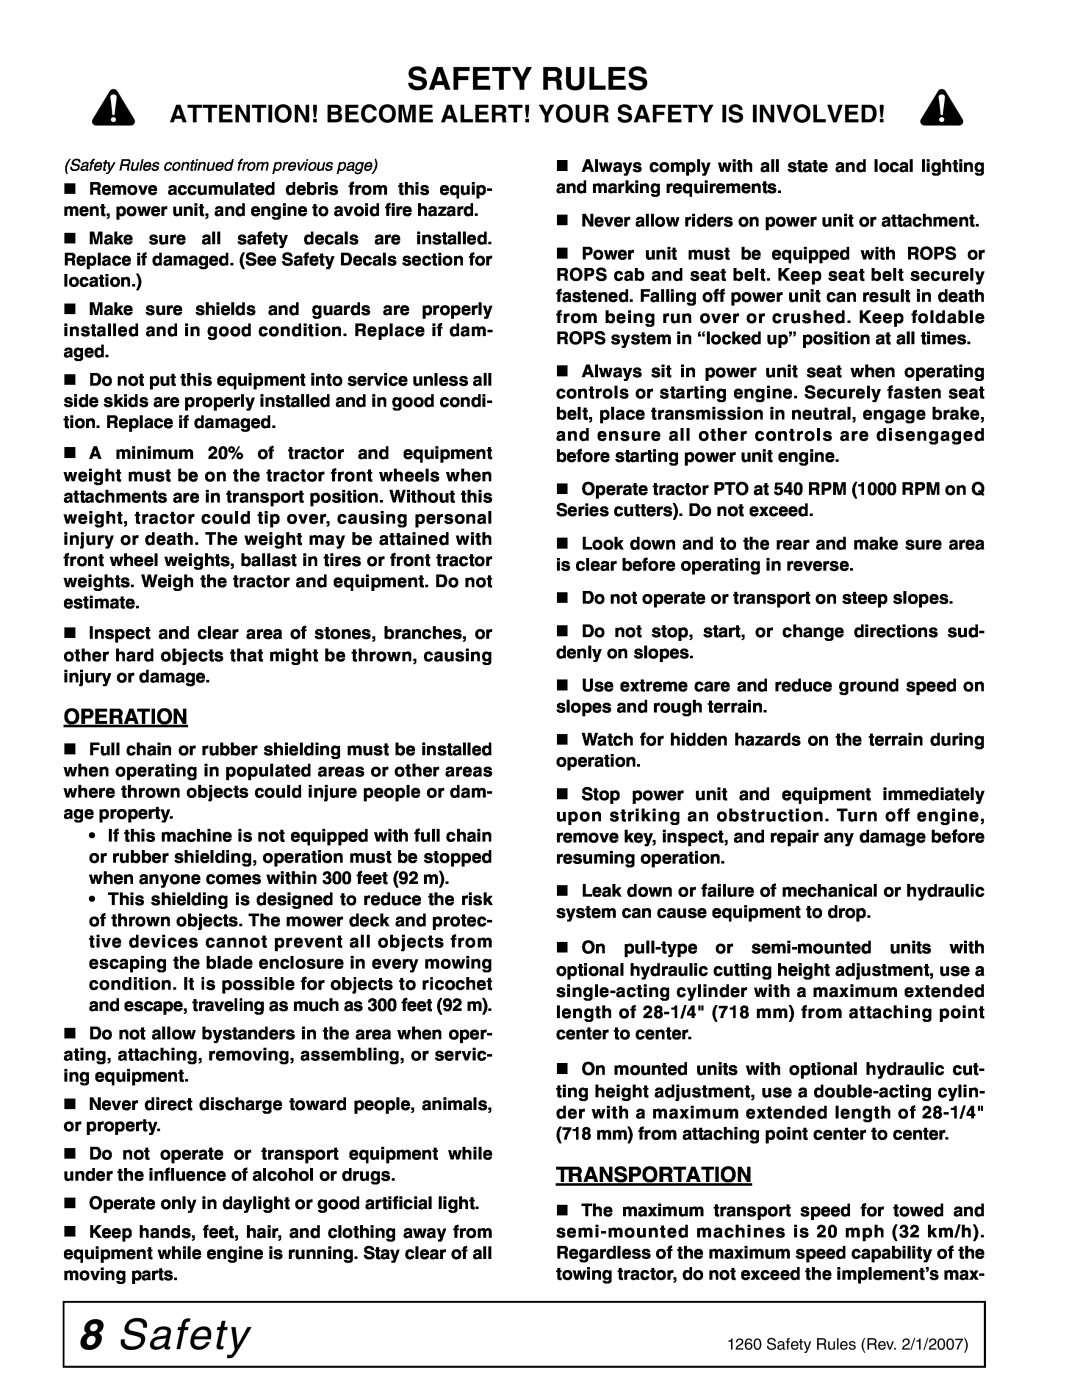 Woods Equipment DS1260 manual Safety Rules, Attention! Become Alert! Your Safety Is Involved, Operation, Transportation 